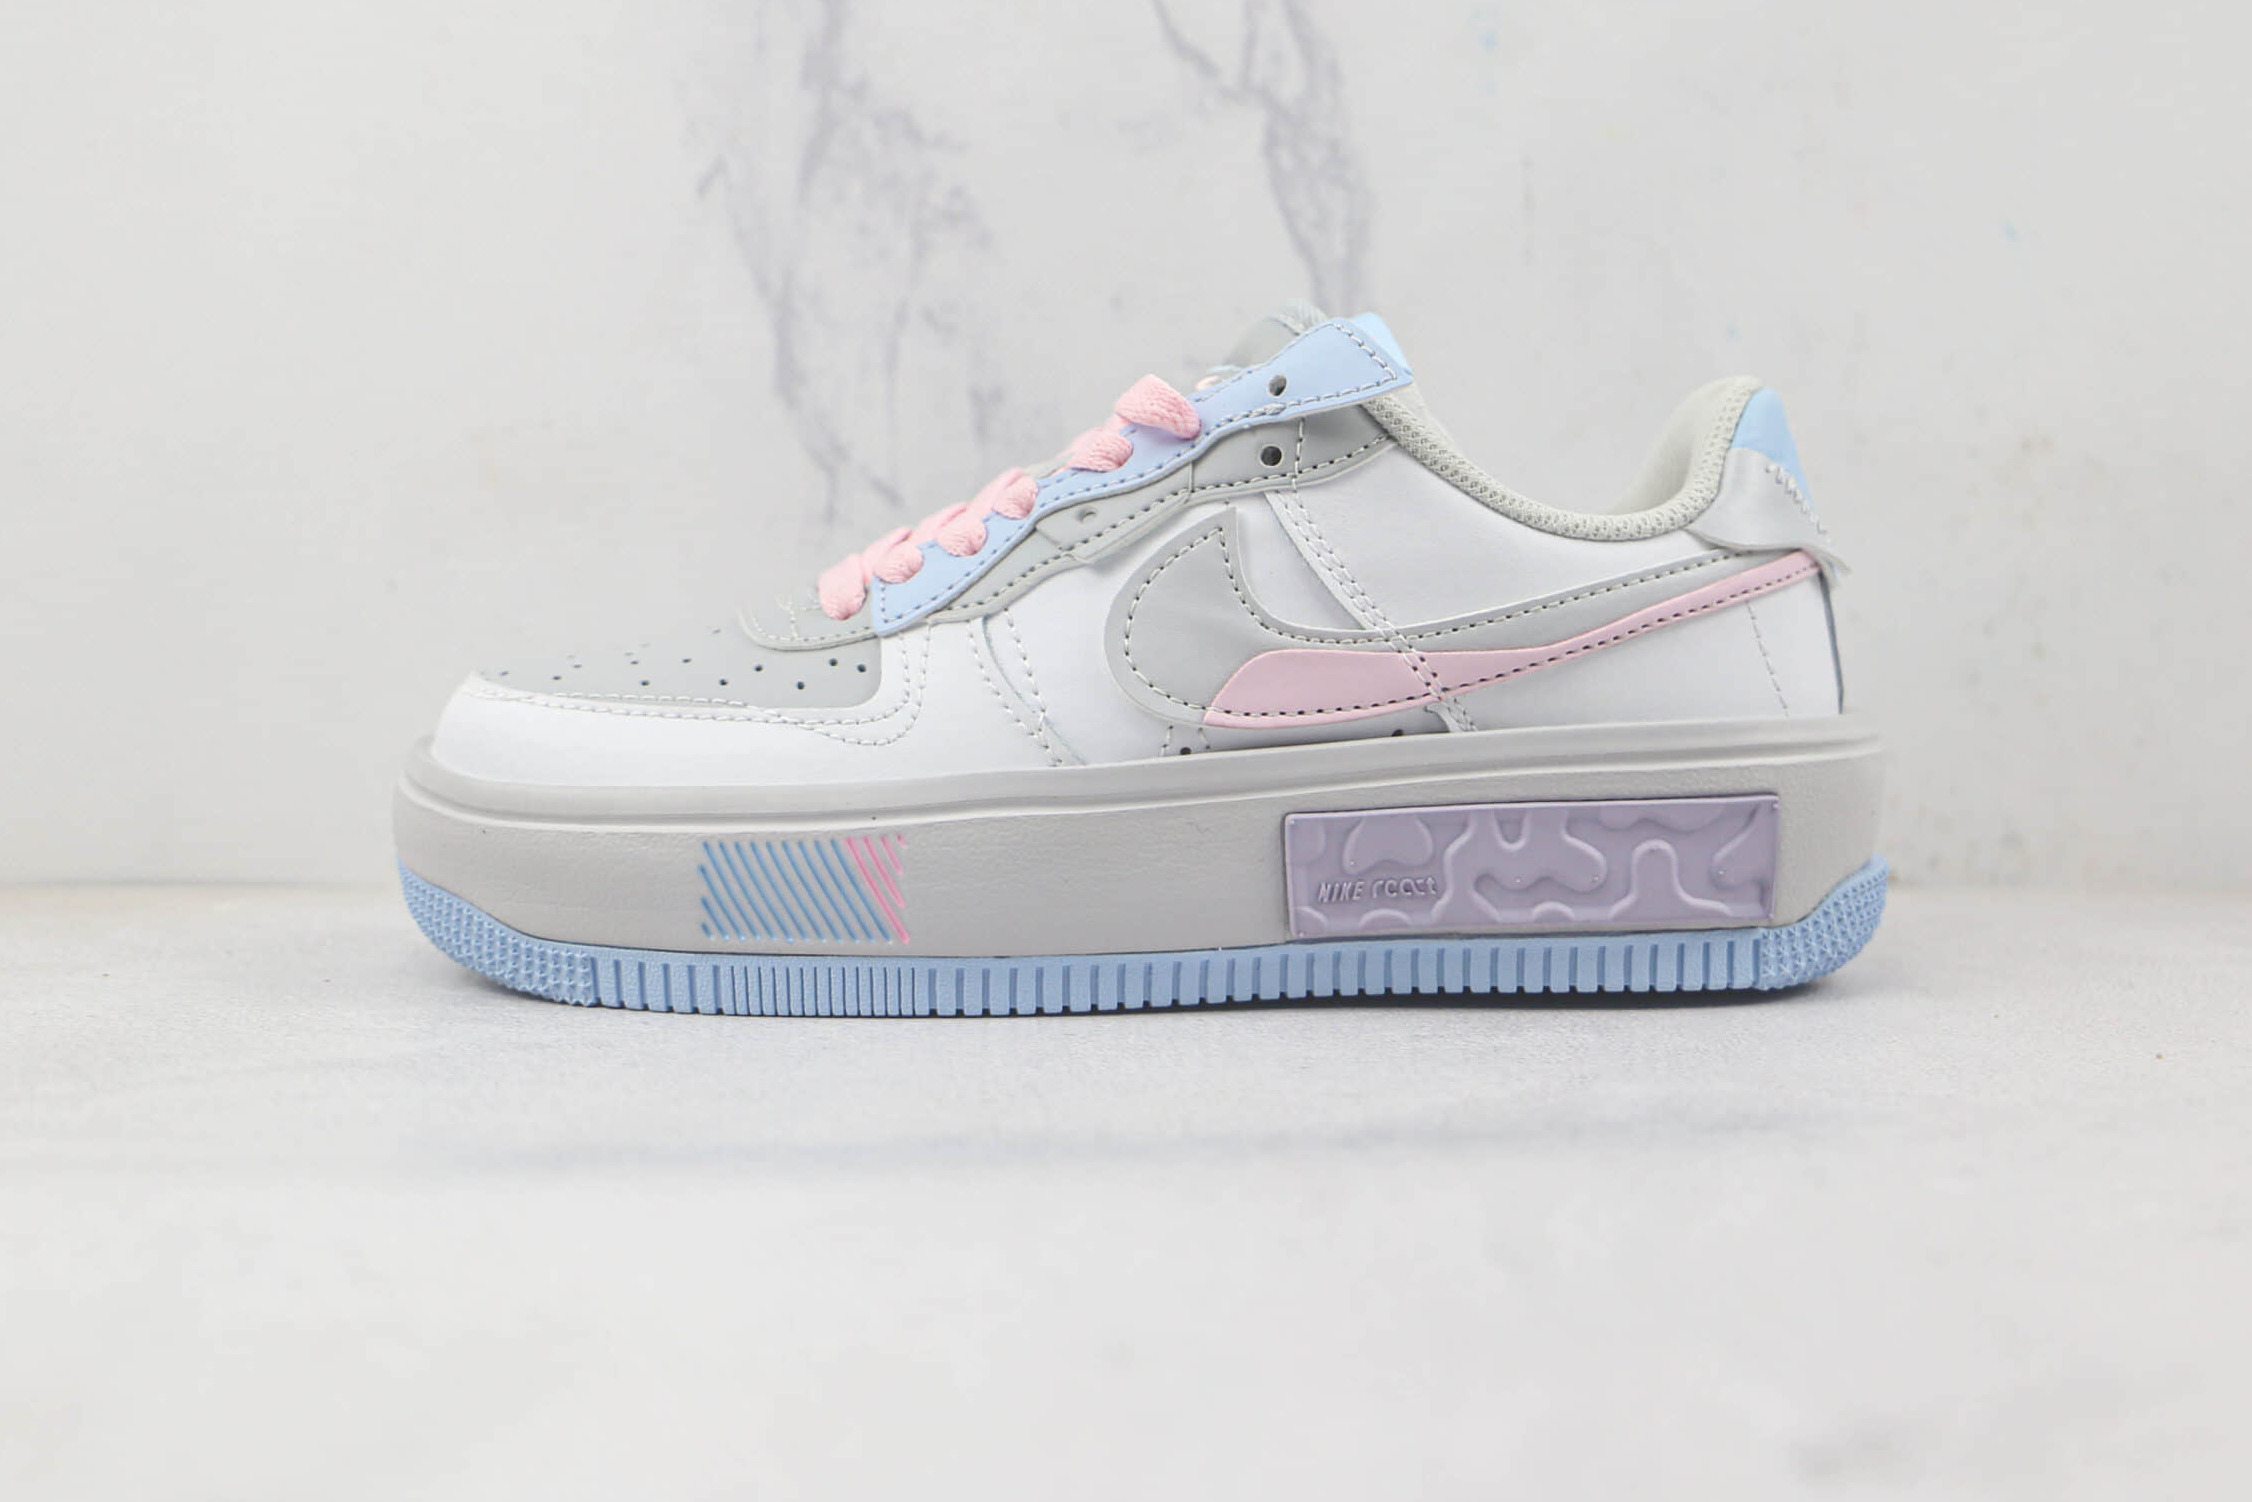 Nike Air Force 1 Fontanka Grey Pink Purple Blue CW6688-605 - Stylish and Vibrant Sneakers